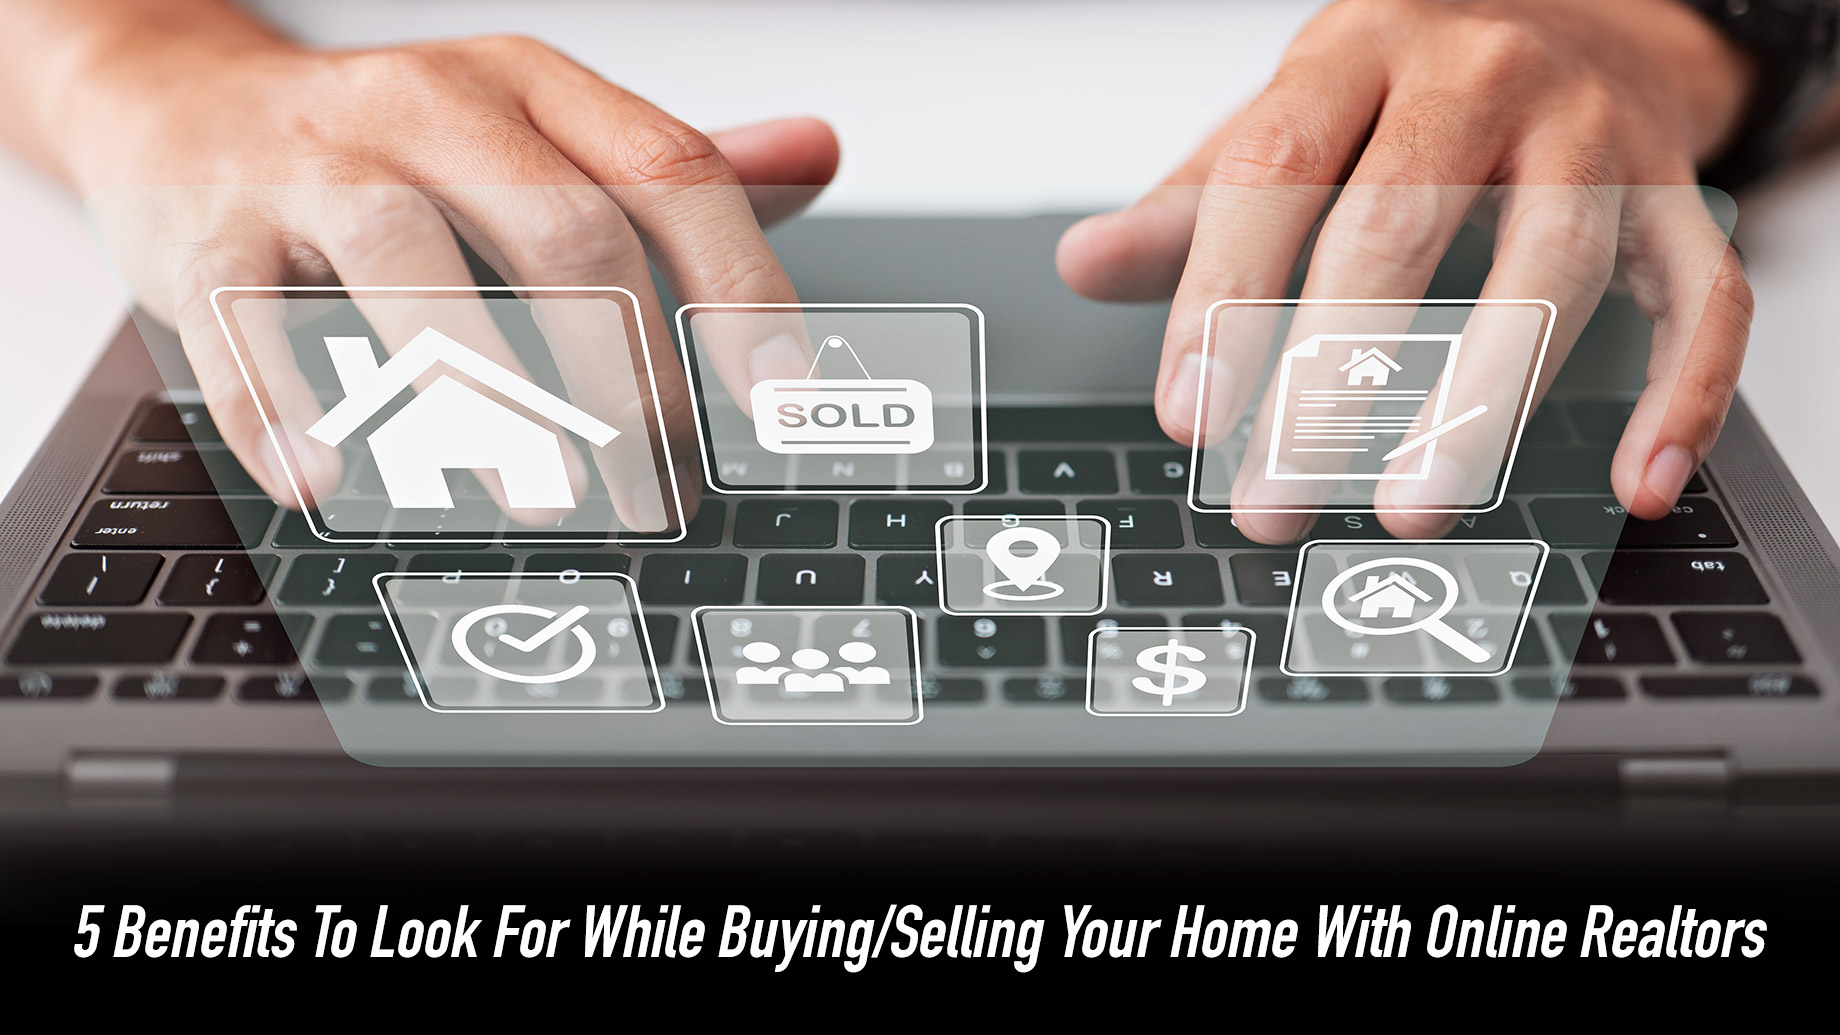 5 Benefits To Look For While Buying/Selling Your Home With Online Realtors